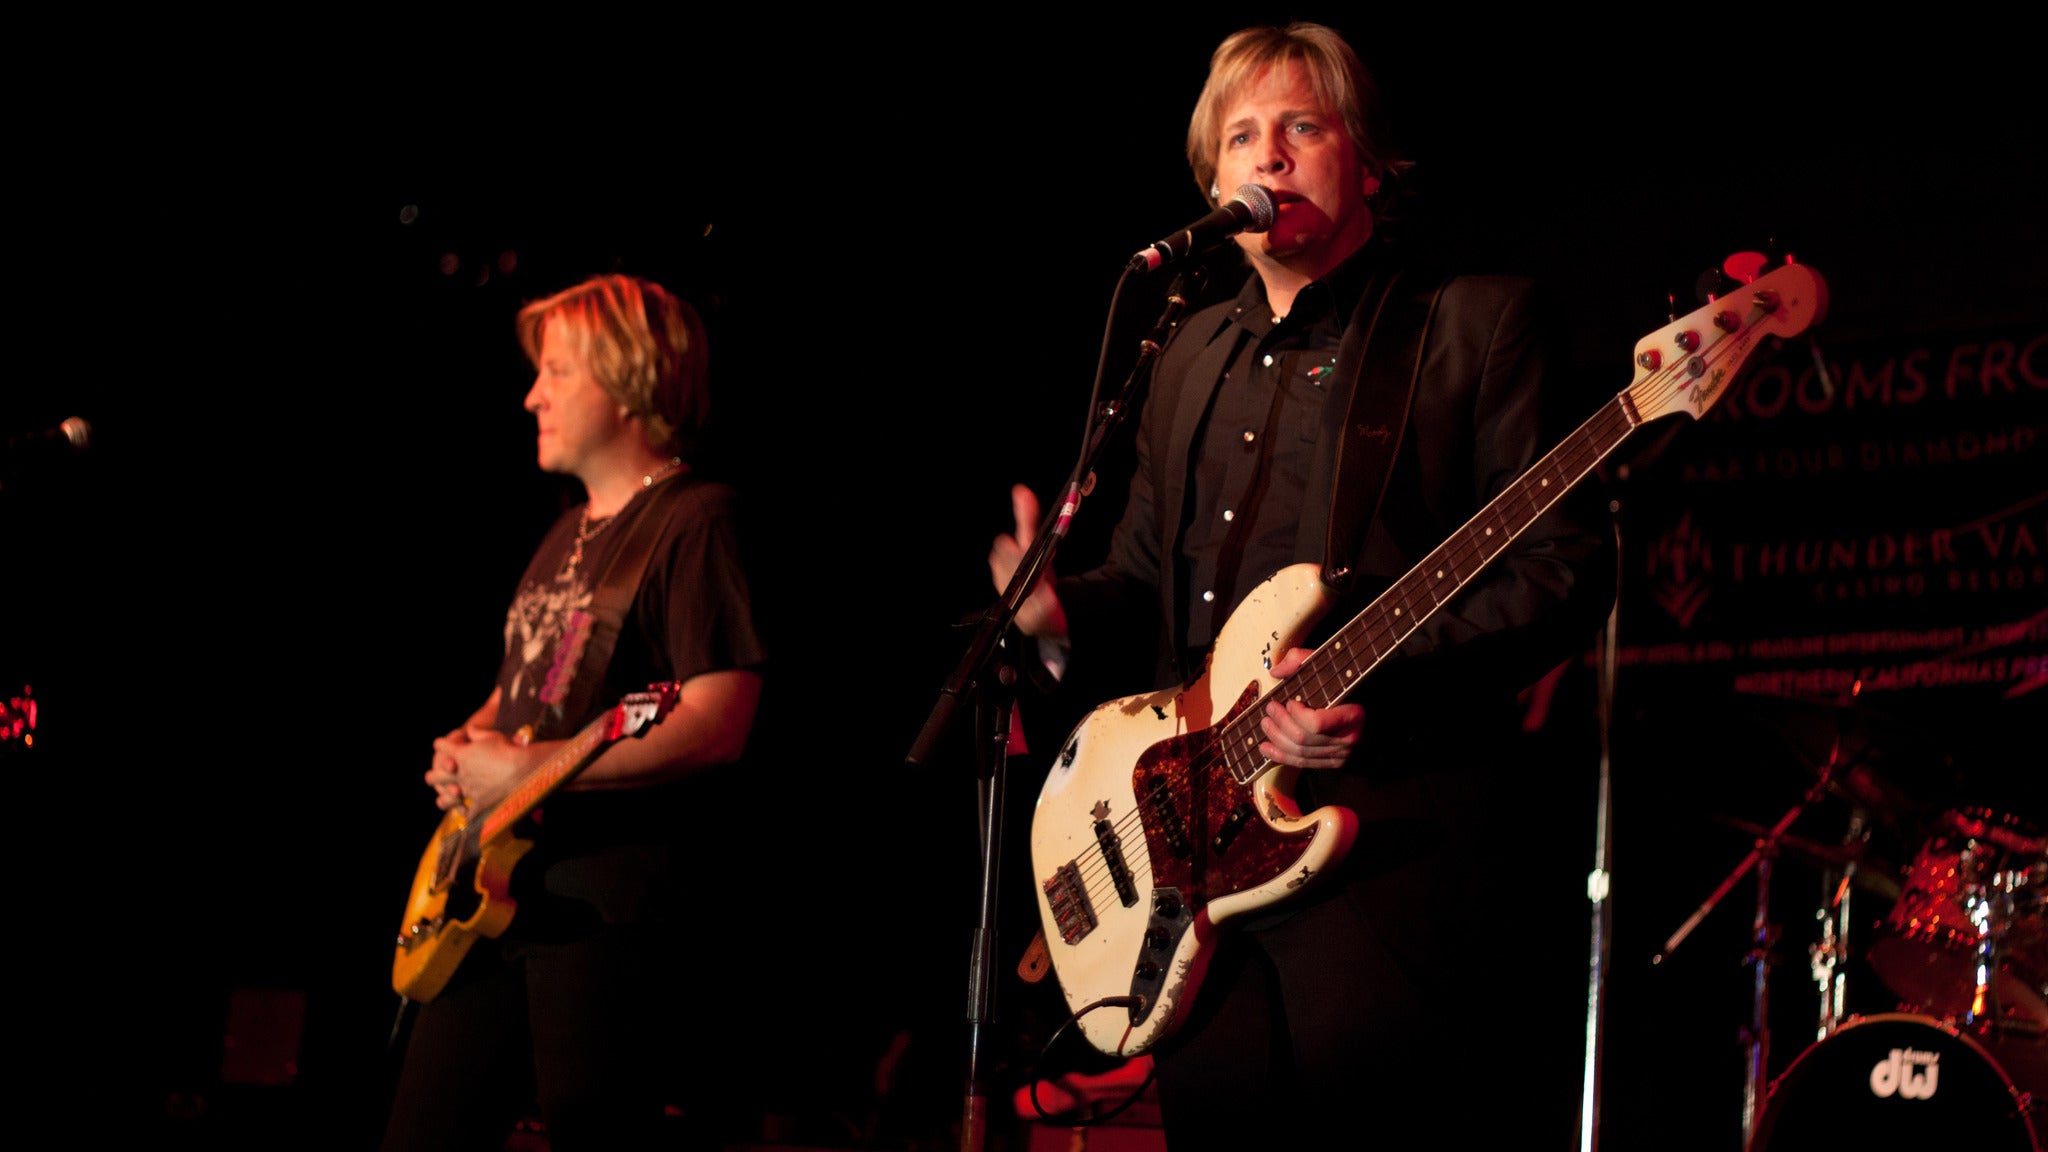 Ricky Nelson Remembered Starring Matthew and Gunnar Nelson in Joliet promo photo for Exclusive presale offer code